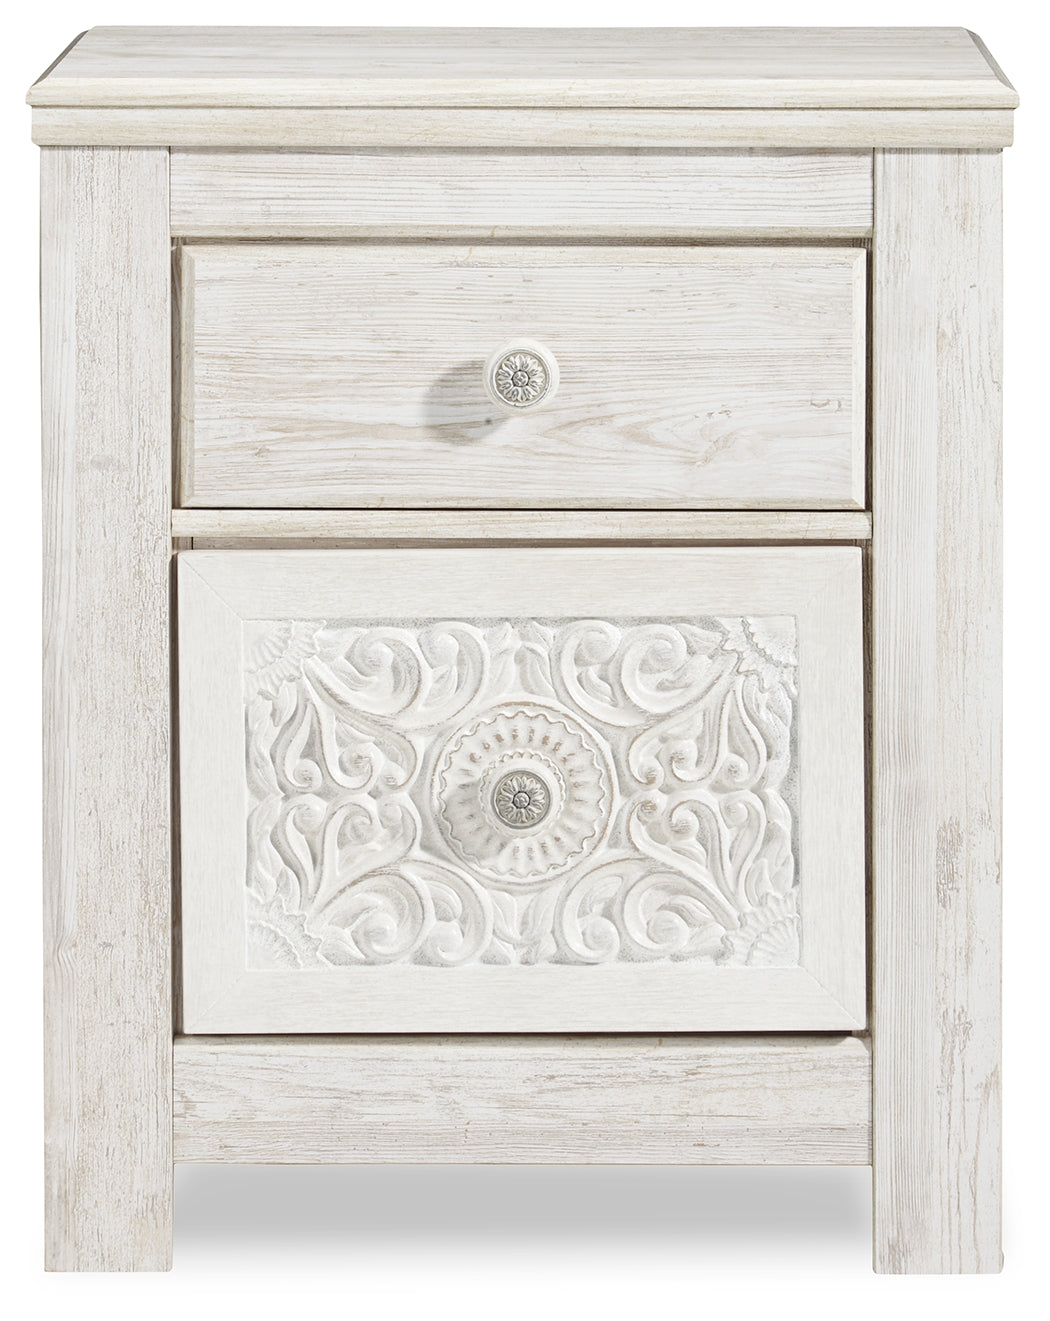 Paxberry Whitewash Queen Panel Bedroom Set with Chest and Nightstand